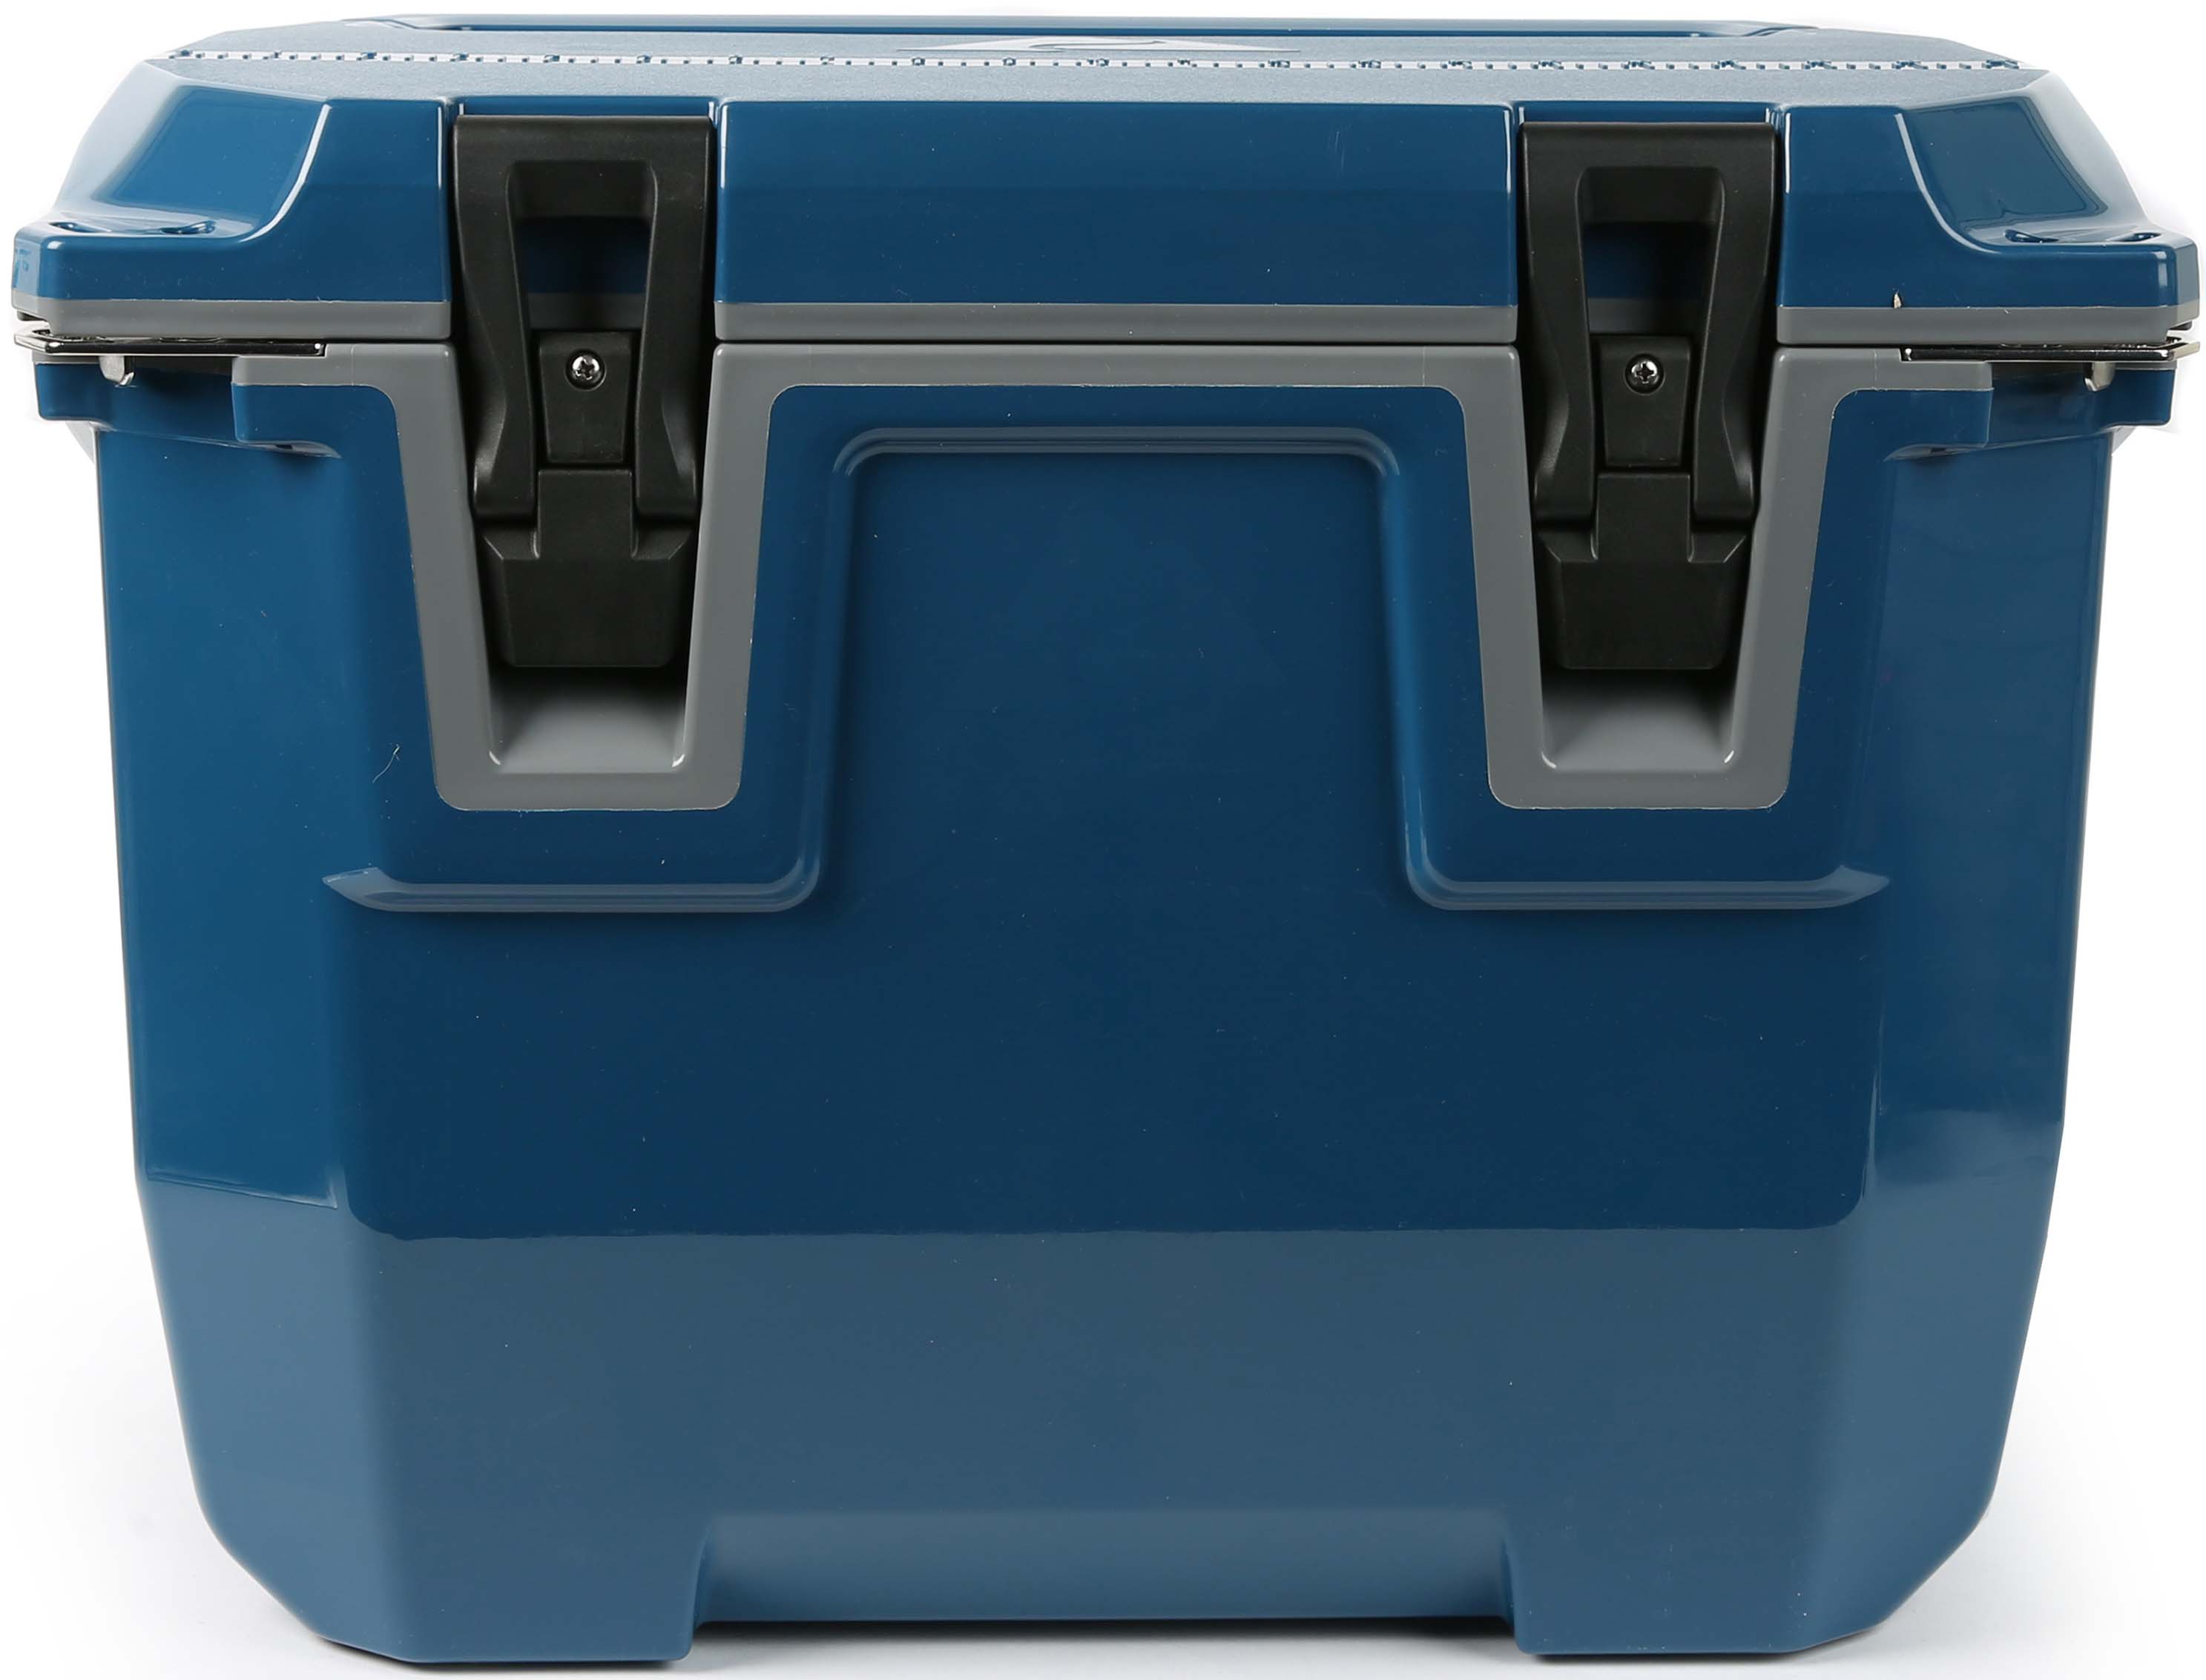 Ozark Trail 35 Quart Hard Sided Cooler with Microban Protection, Stainless Steel Locking Plate, Blue - image 1 of 14